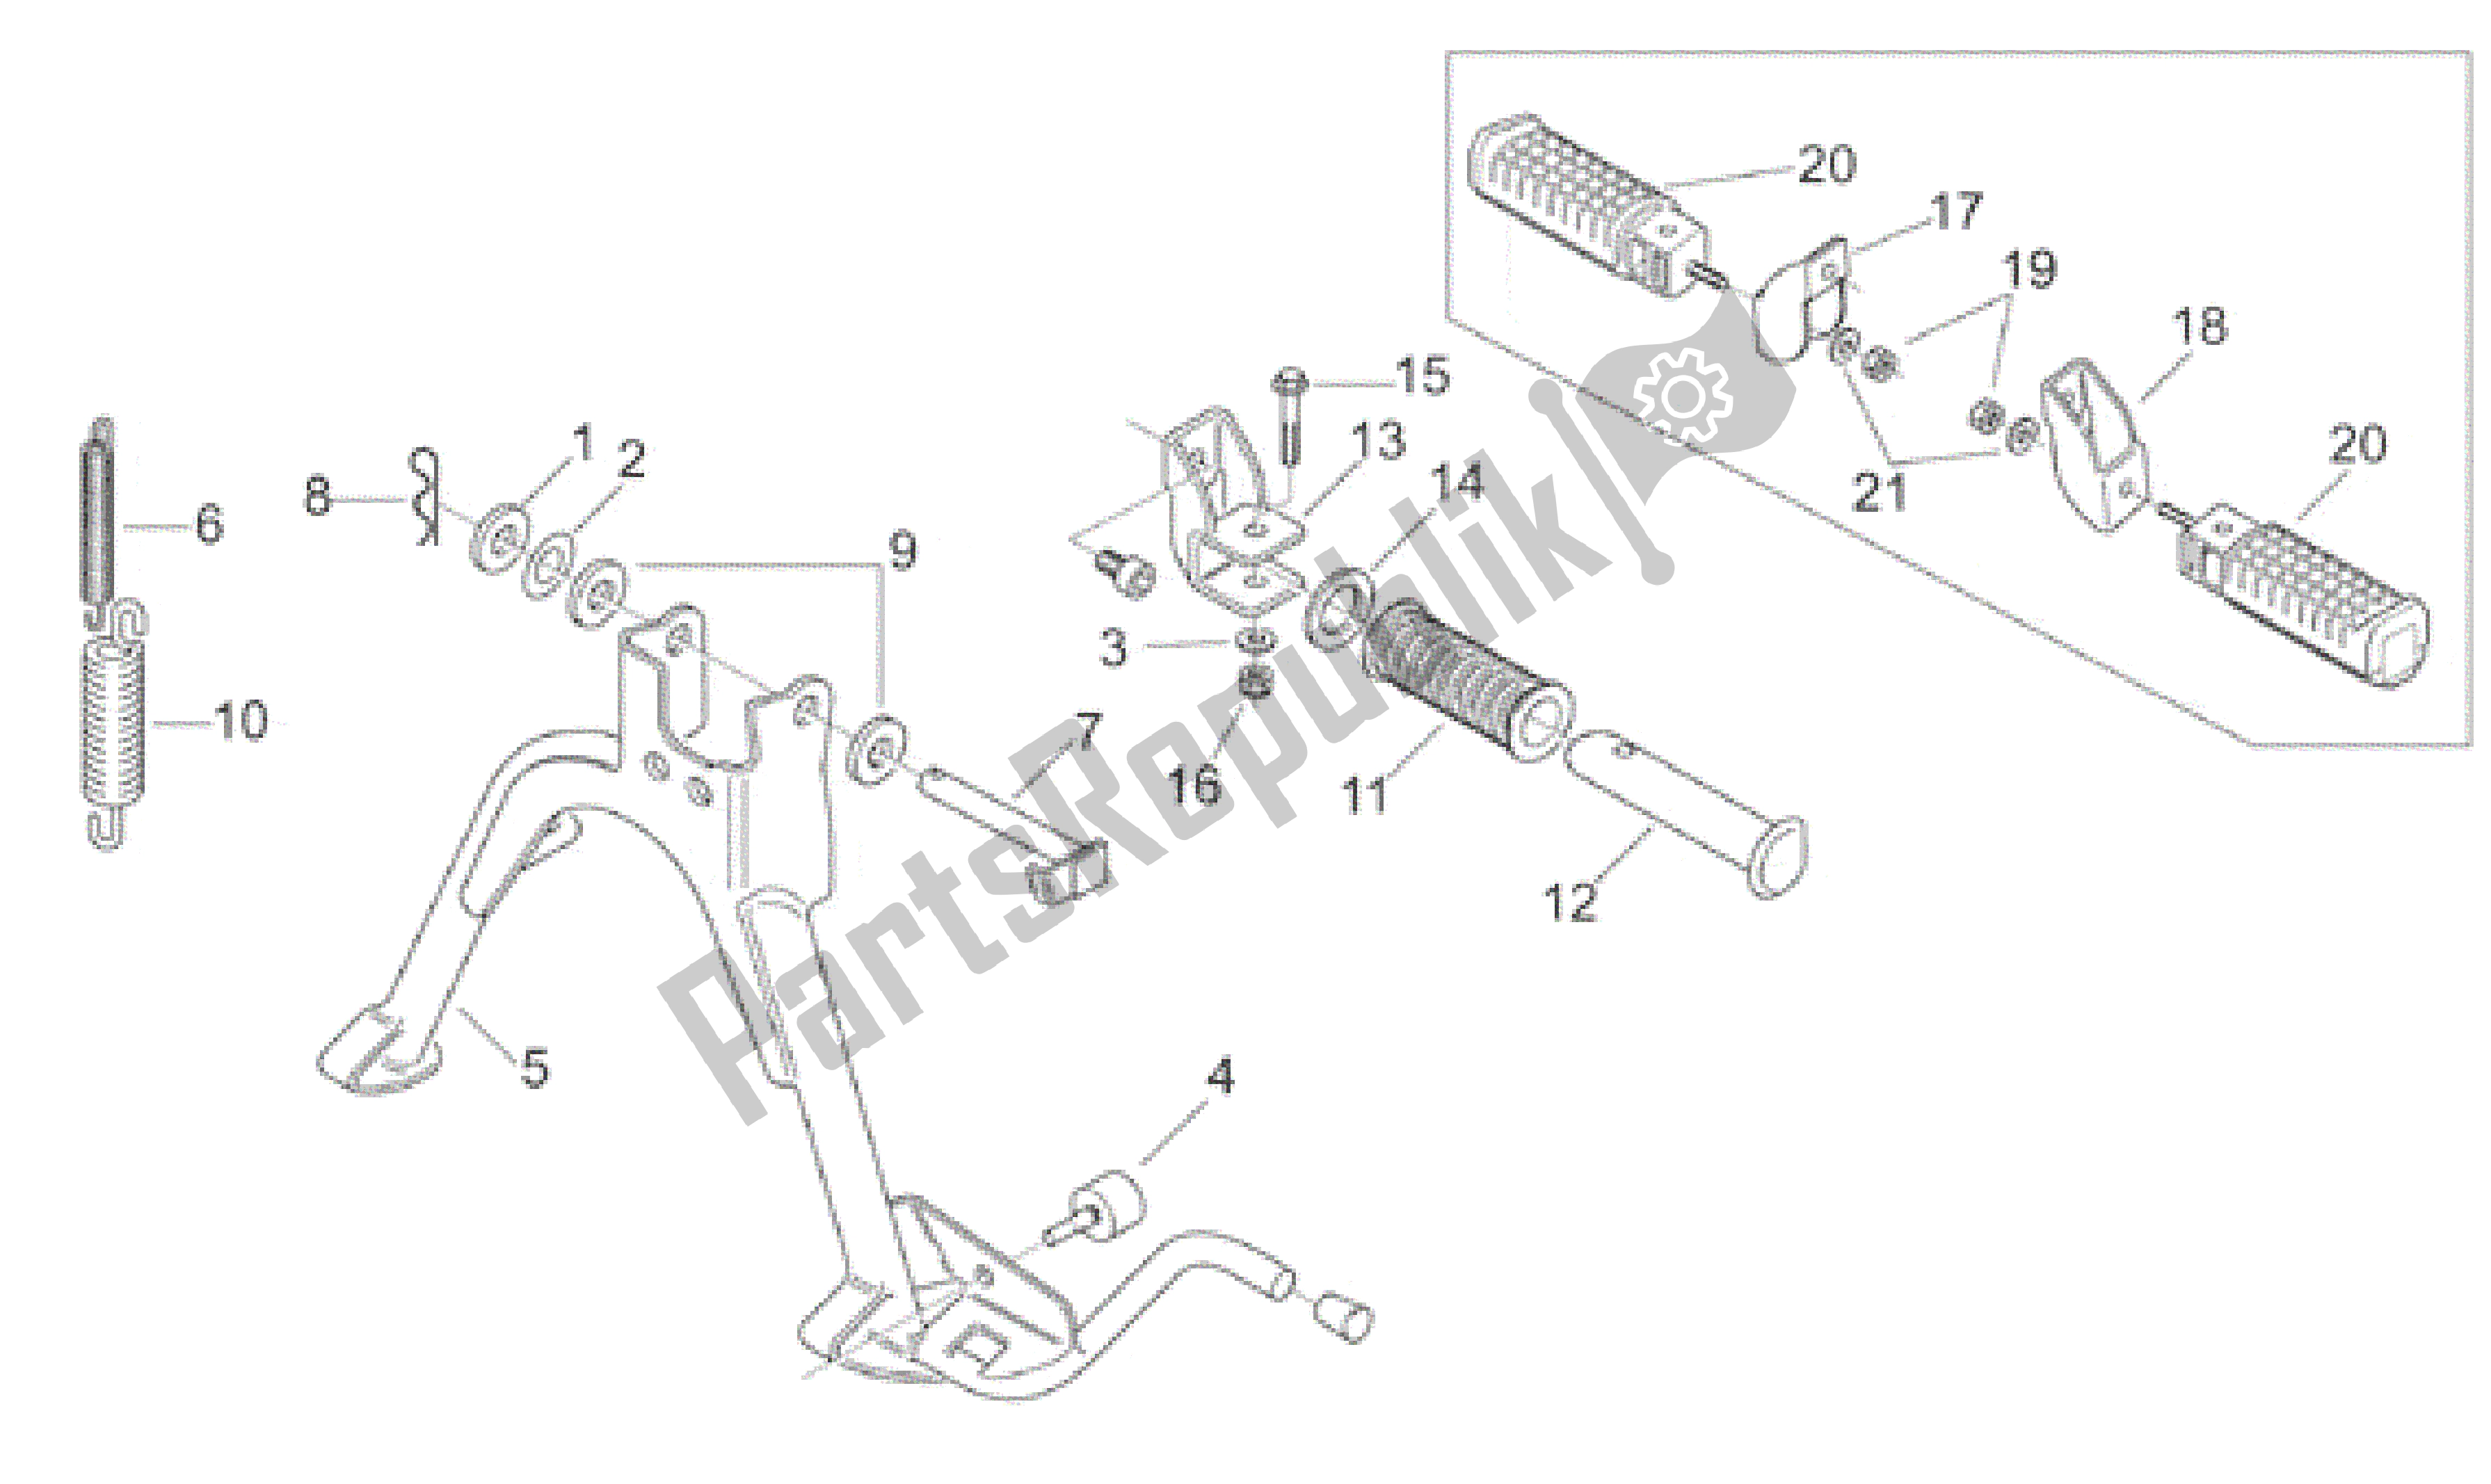 All parts for the Foot Rests - Lateral Stand of the Aprilia Scarabeo 50 2000 - 2005